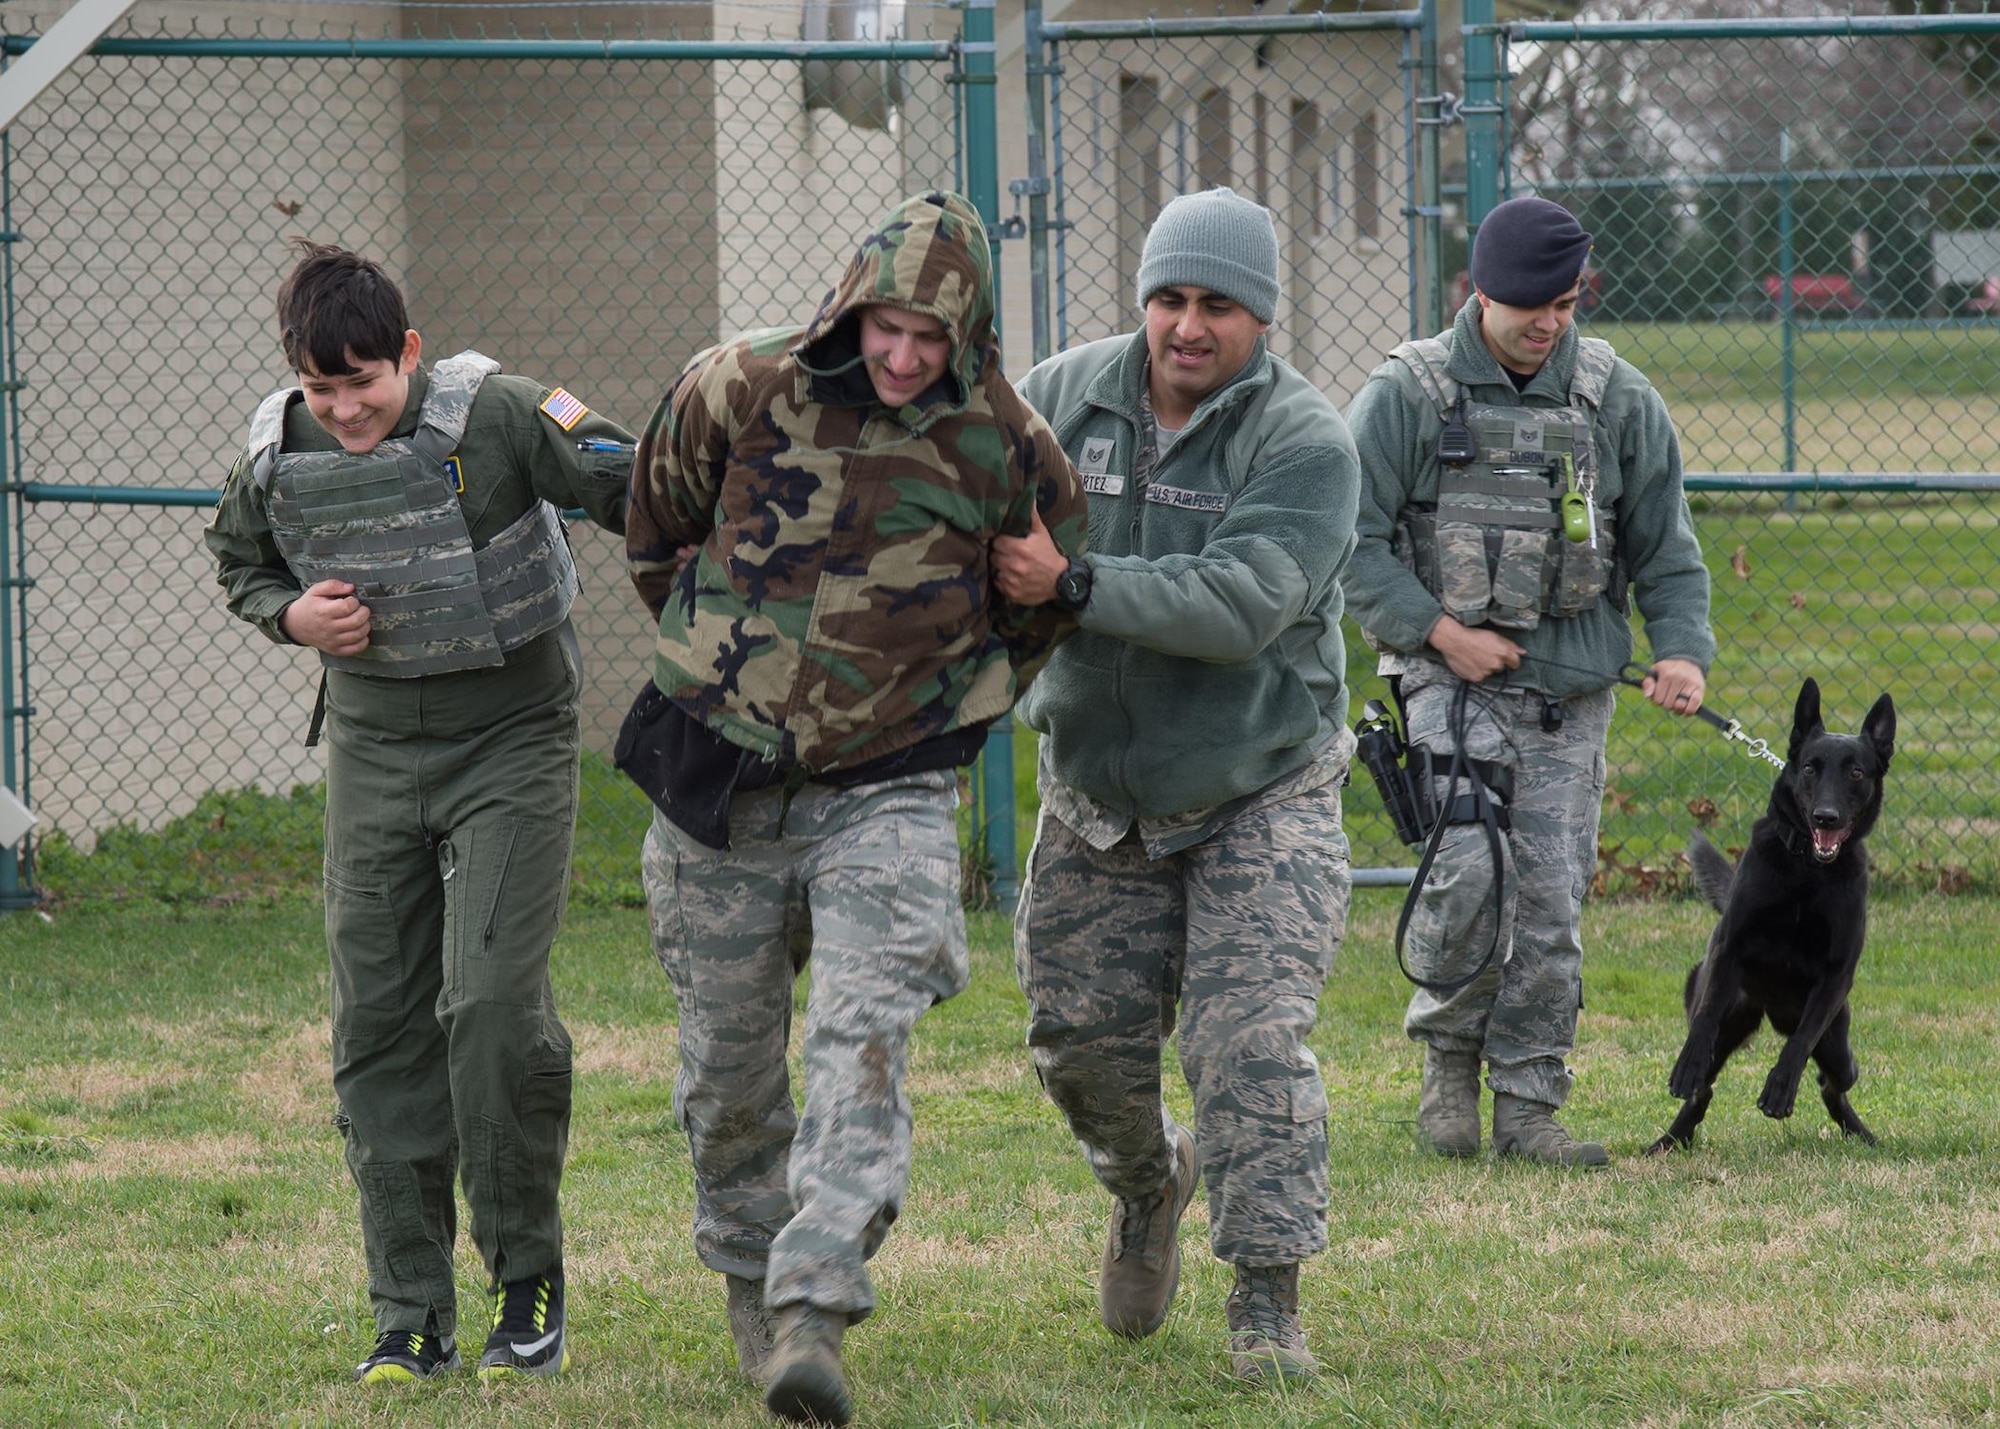 Dalton Padgett and members of the 436th Security Forces Squadron apprehend an assailant during a training exercise Mar. 3, 2017, at Dover Air Force Base, Del. Padgett got to meet and train with military working dogs, toured the kennels and saw the various weapon systems used by security forces. (U.S. Air Force photo by Mauricio Campino)